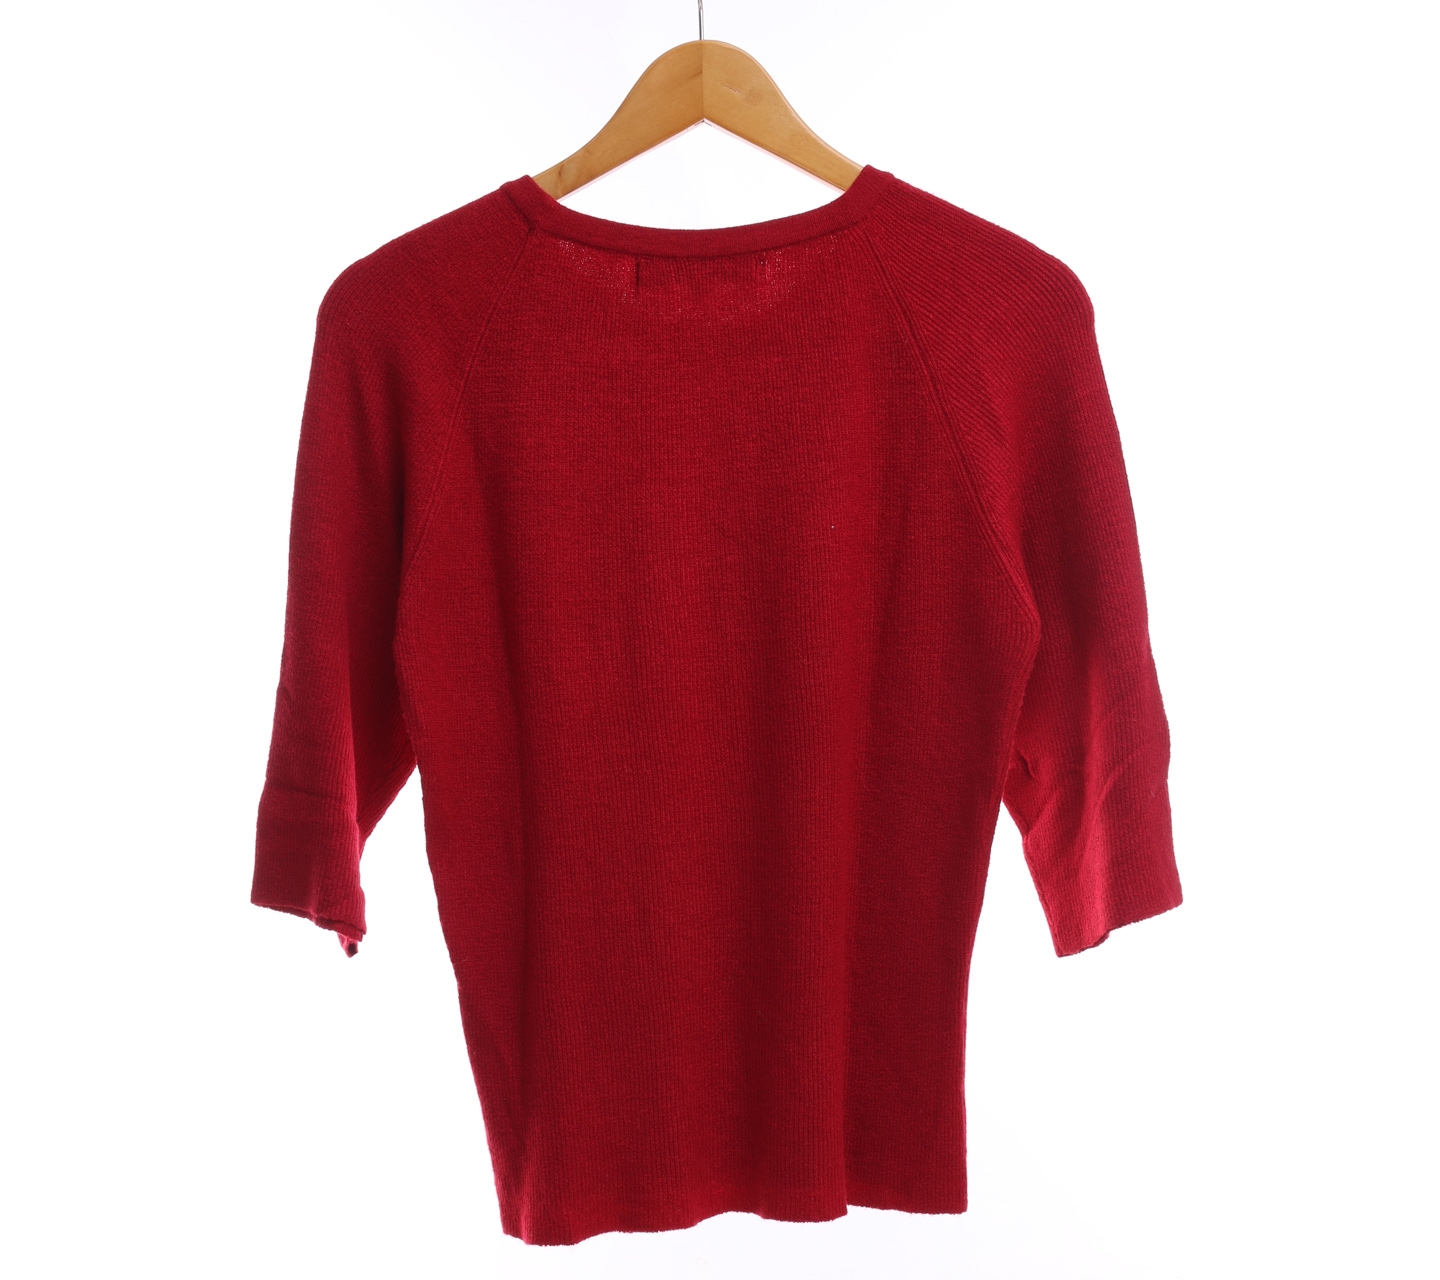 P.S. The Spirit Of Personal Style Red Knit Blouse